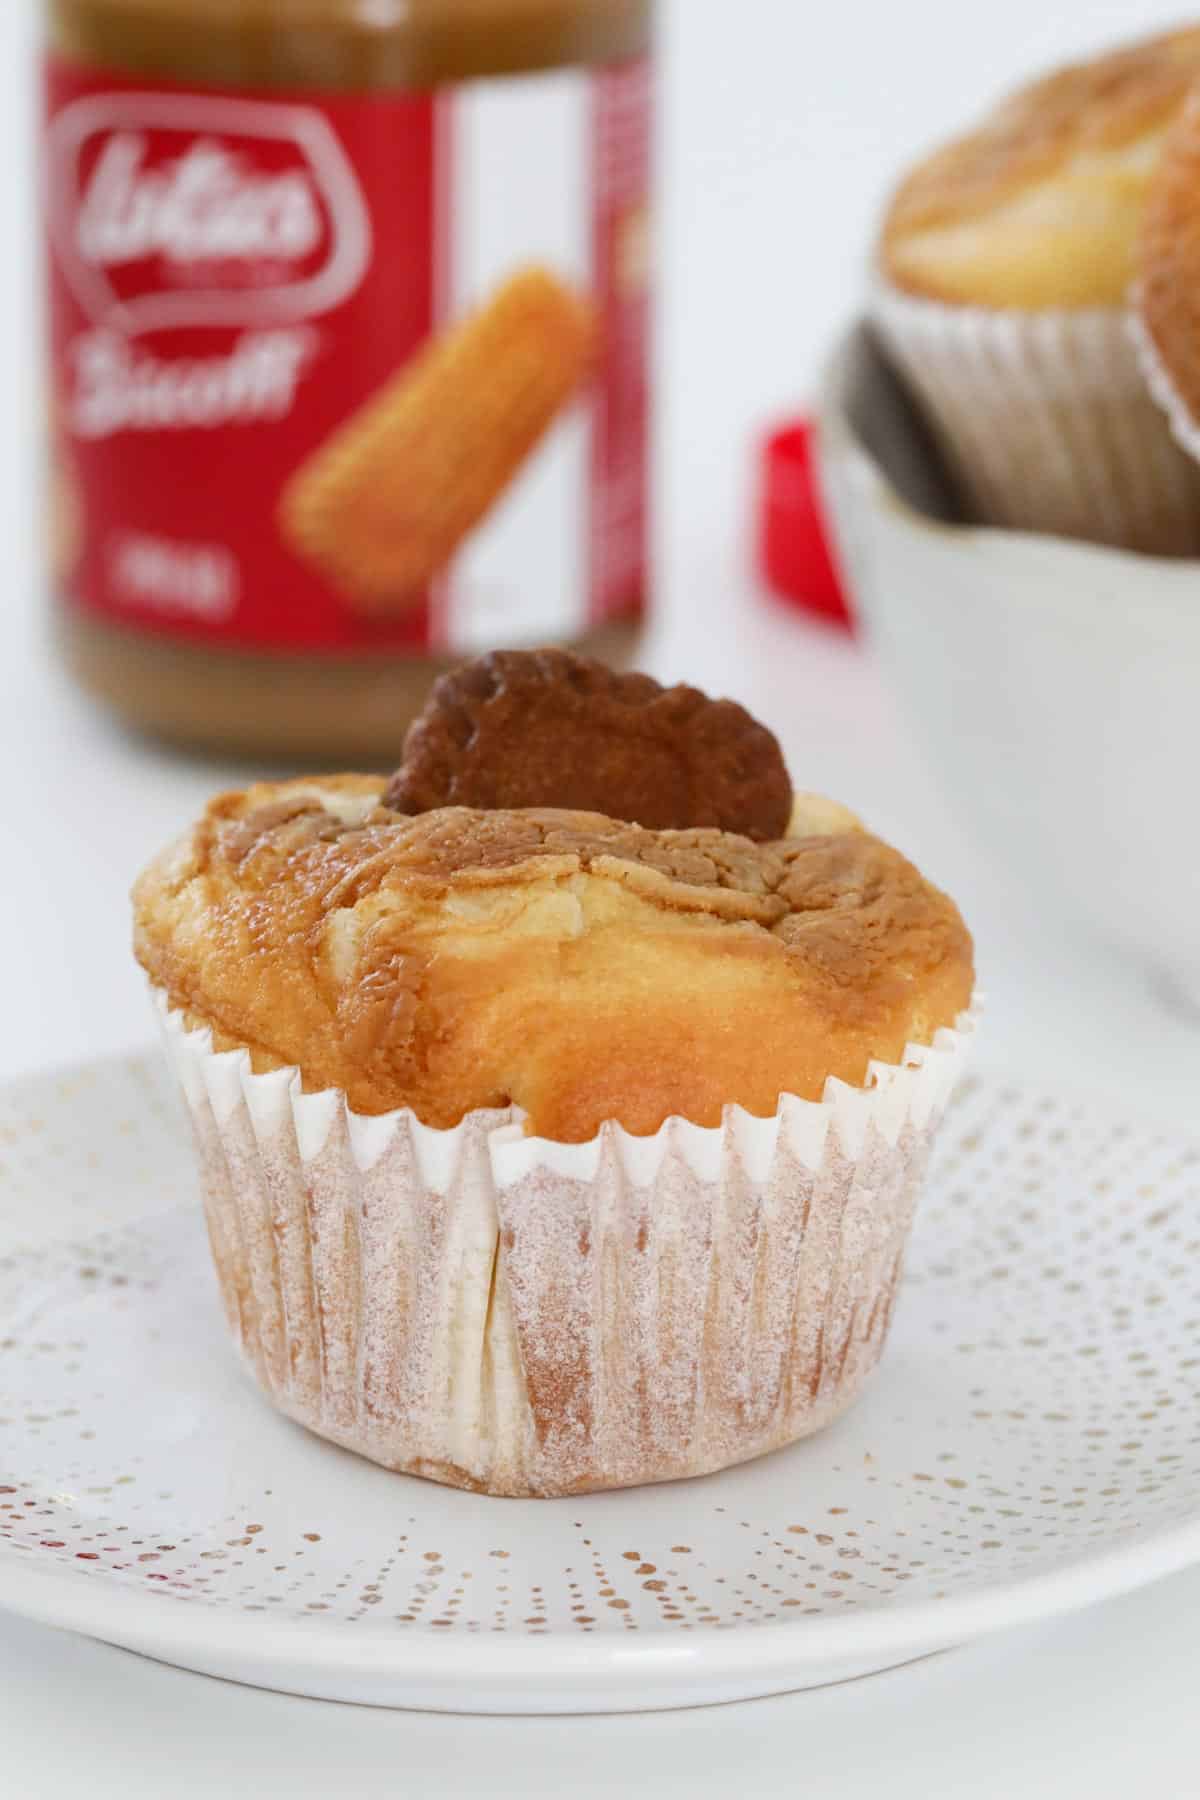 A muffin in front of a jar of Biscoff spread.